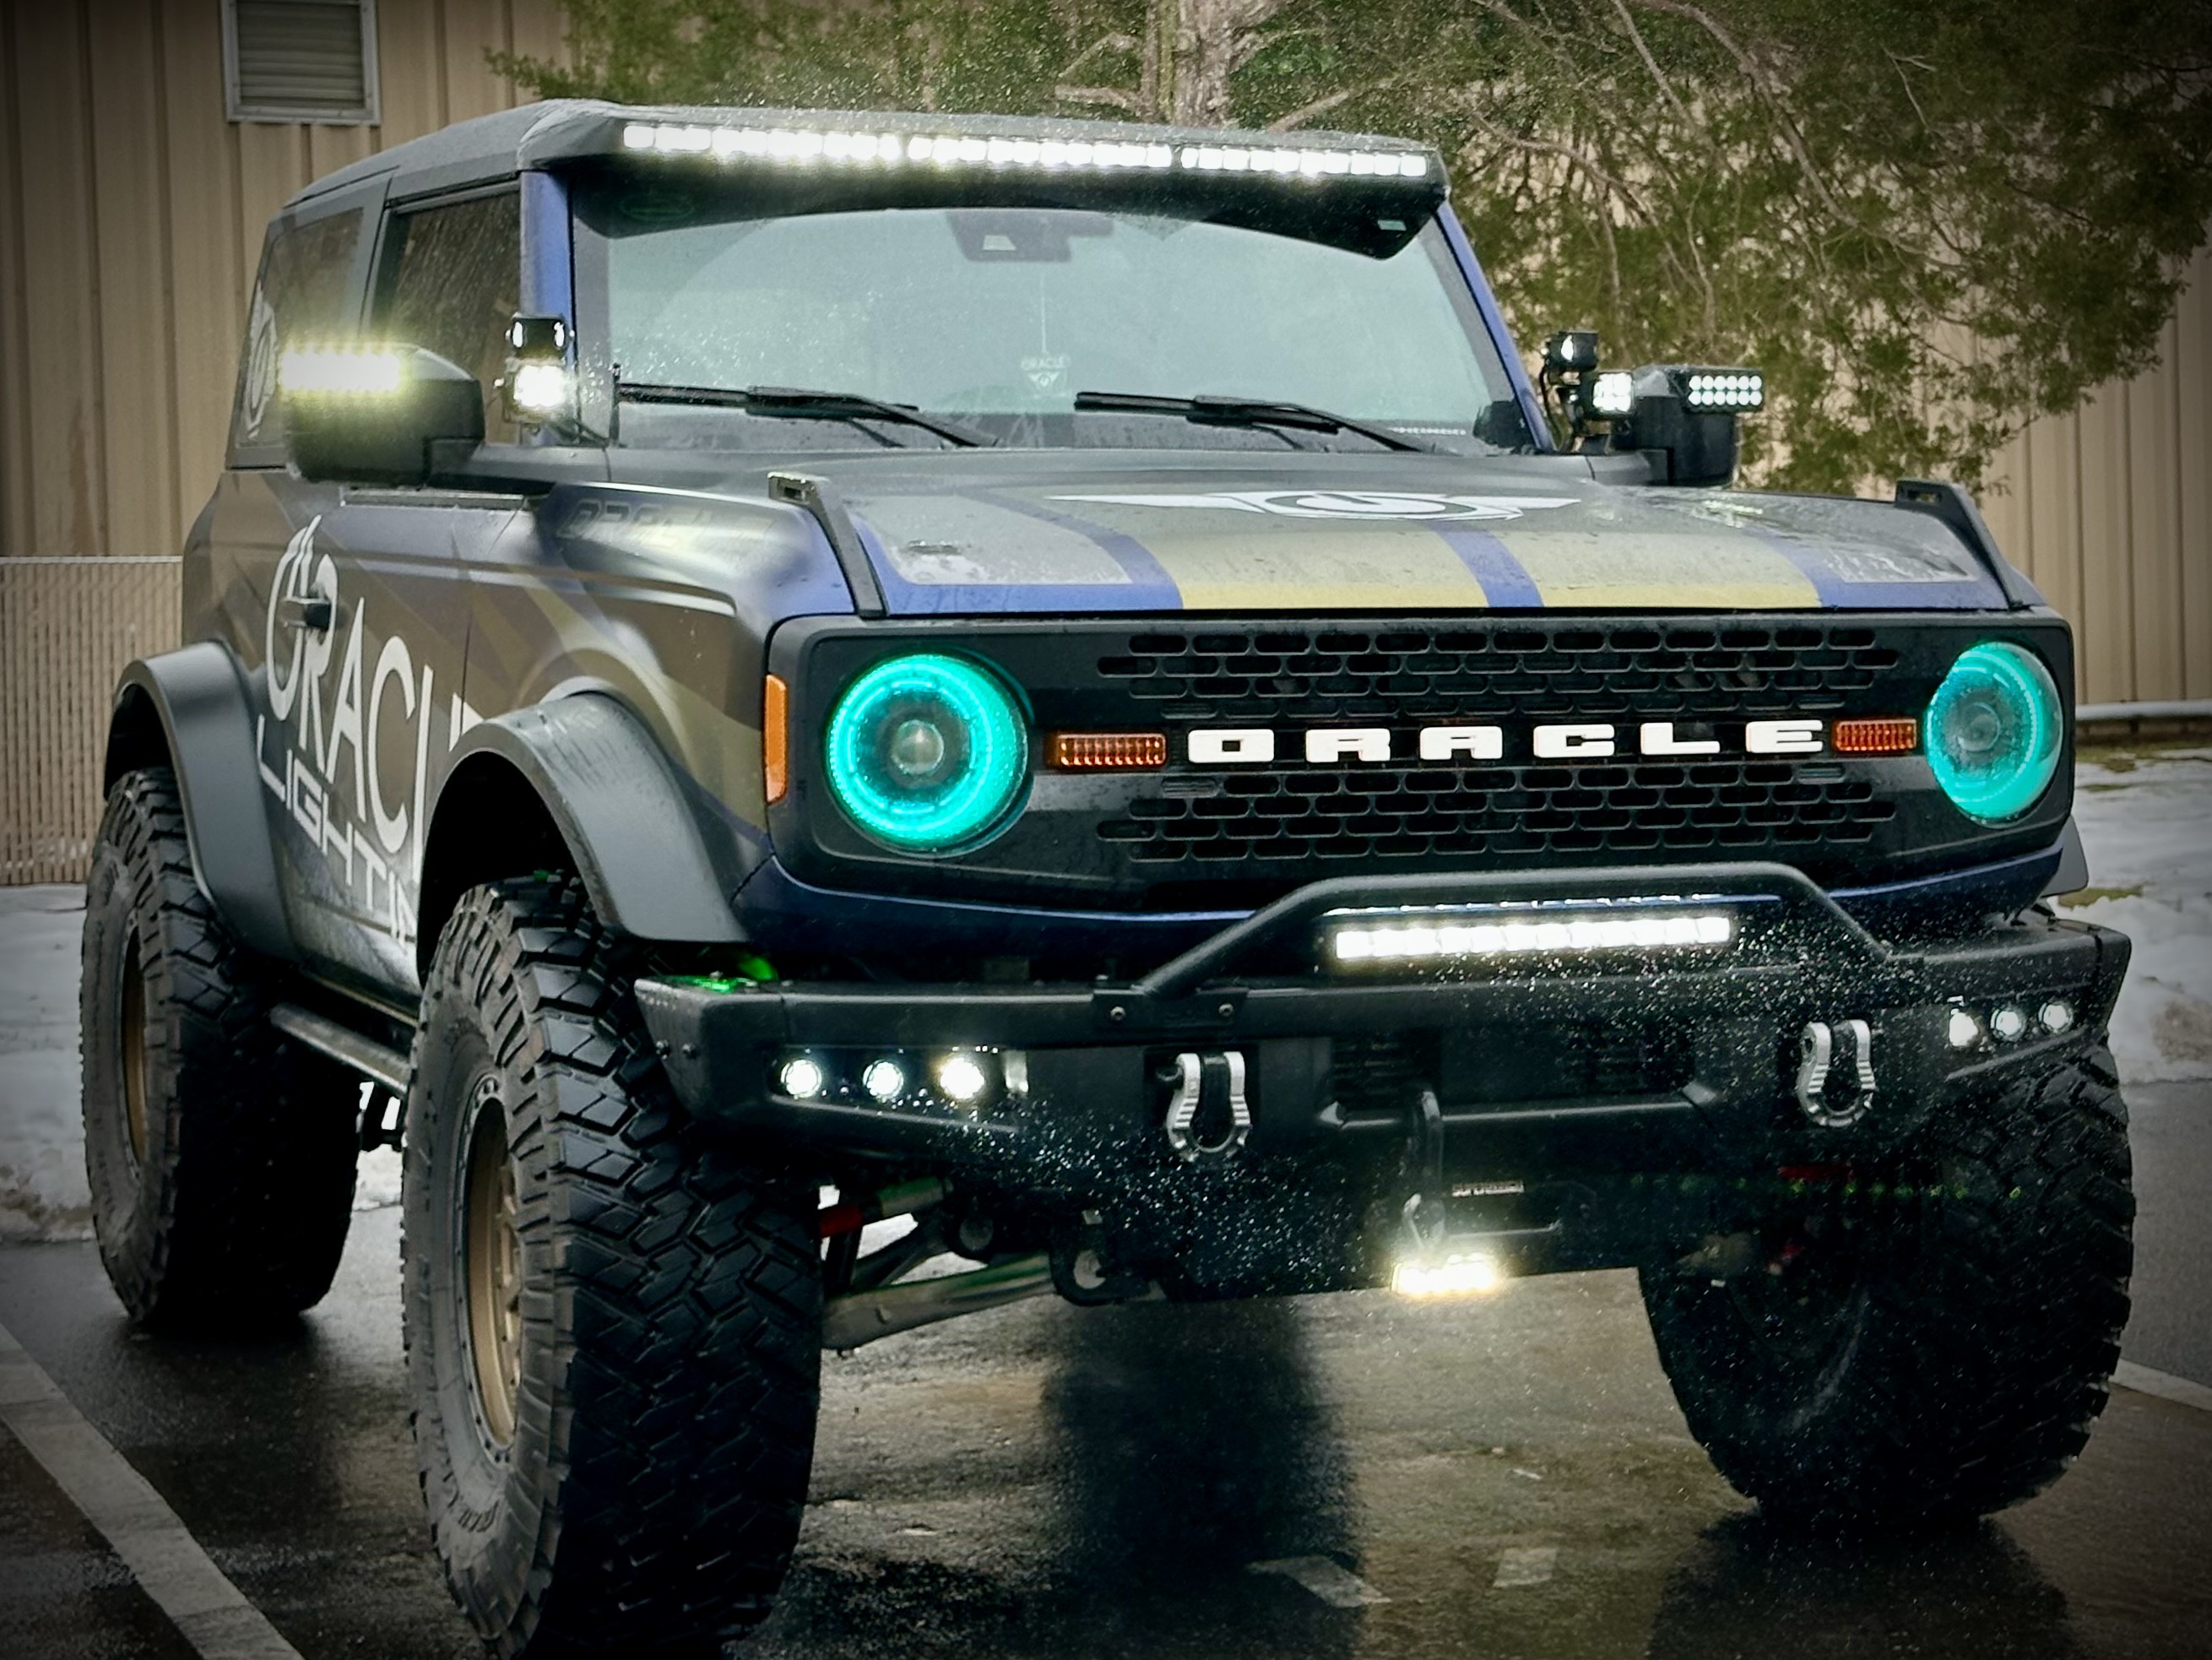 Ford Bronco Front End Friday! Show off your Bronco! ORACLE Lighting Bronco